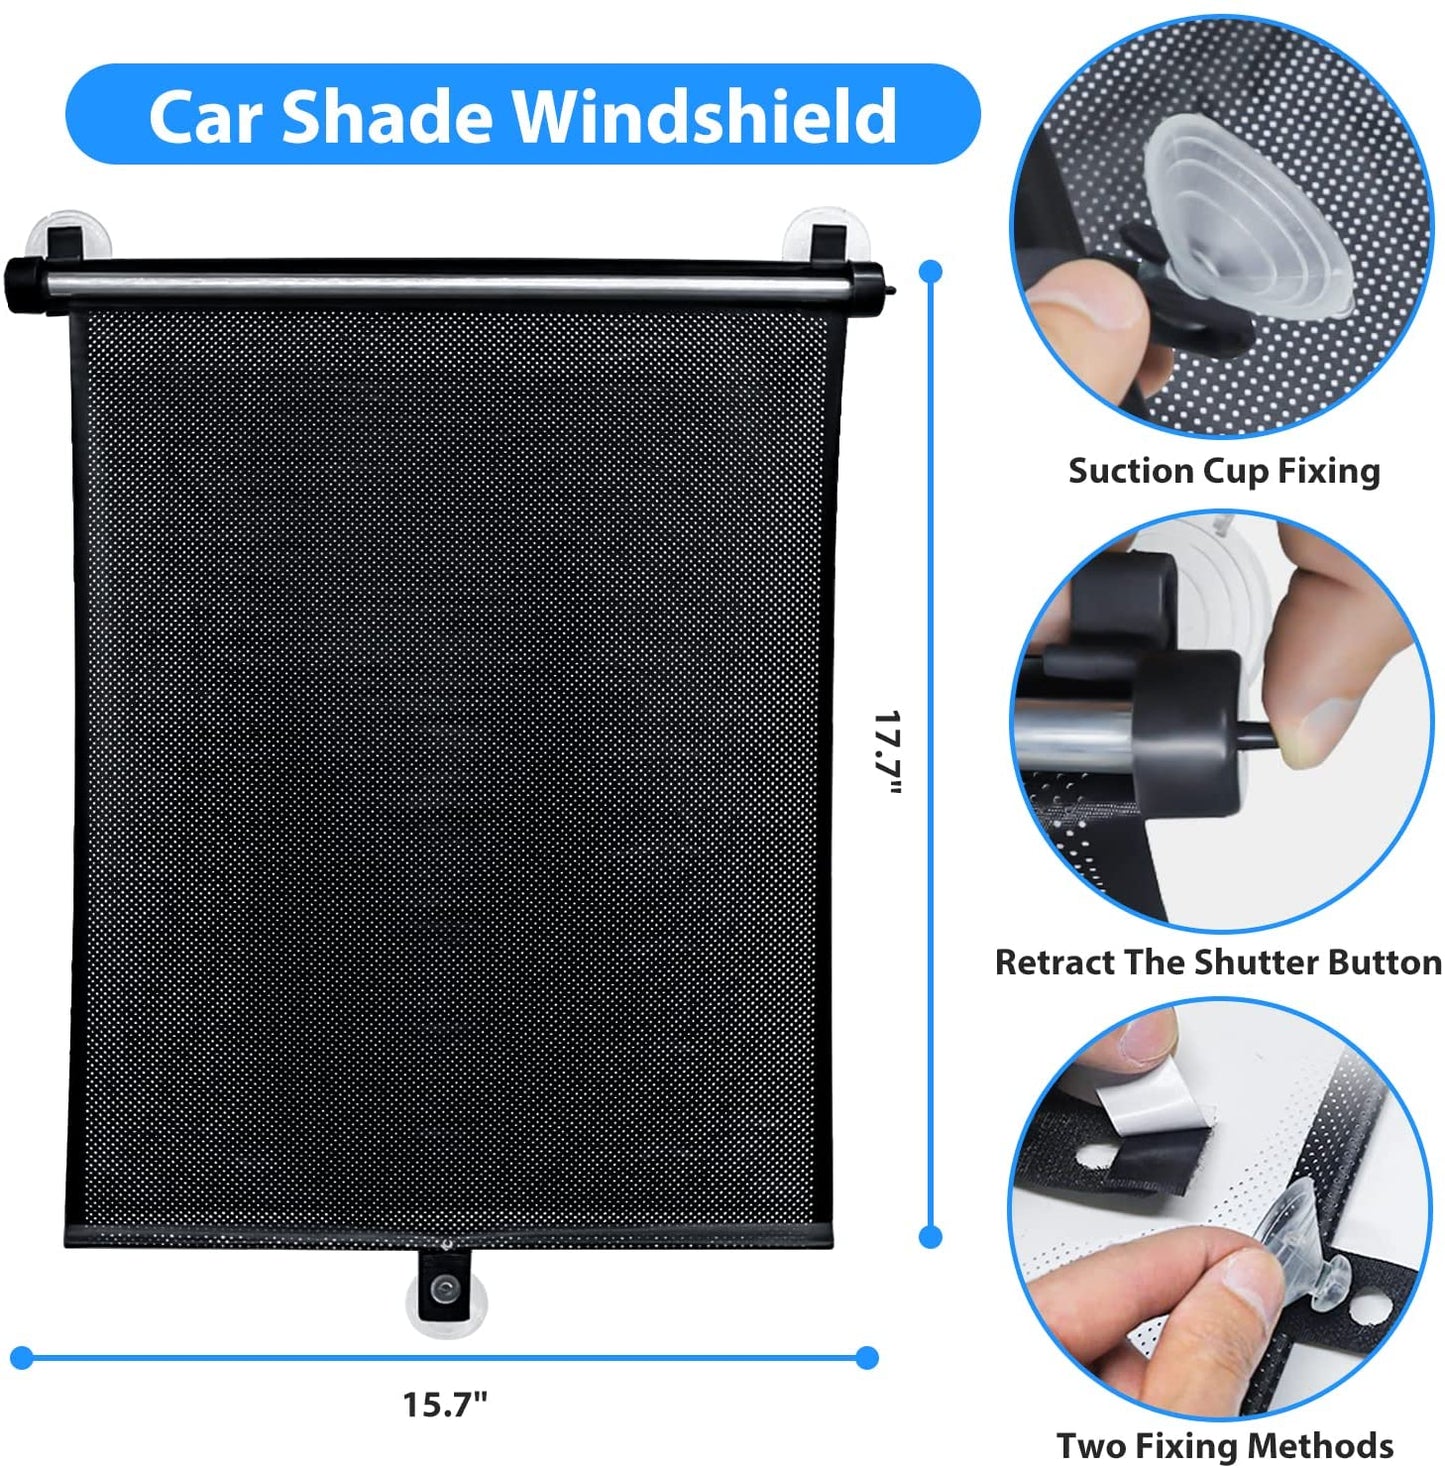 Car Window Shades,2 Pack Side Window Shade for Car,Breathable Foldable Retractable Mesh Car Sun Shade Protects Baby,Kids,Pets from Sun Glare and UV Rays(Black)